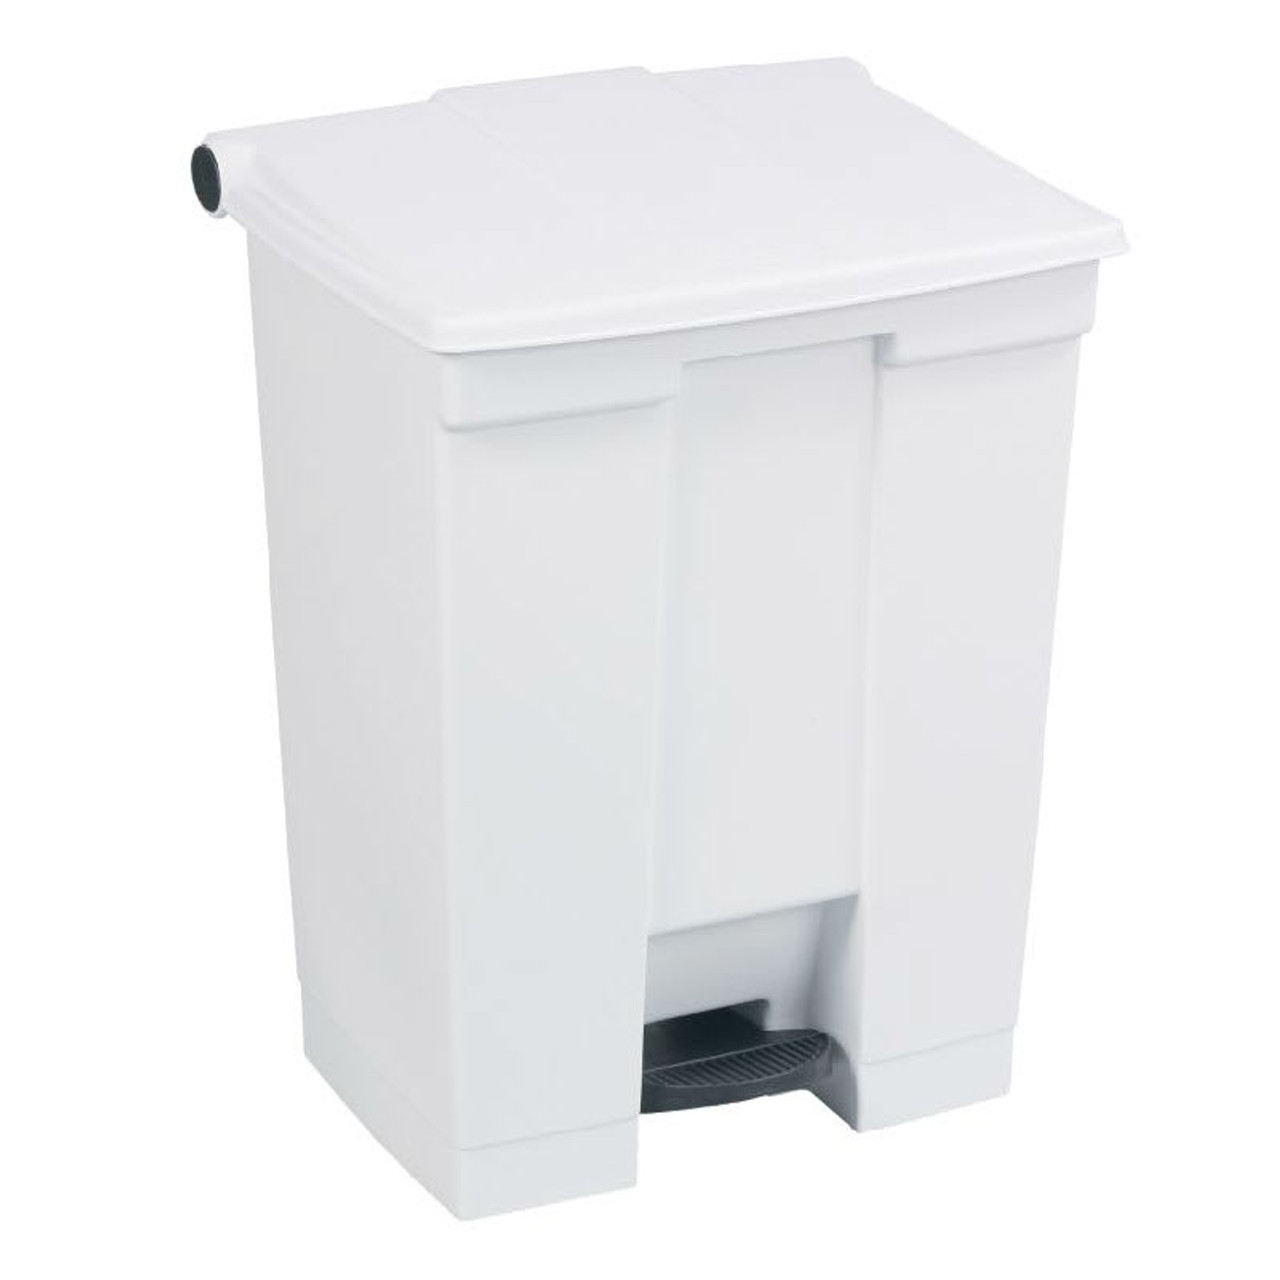 Rubbermaid Step-On Container 68L White